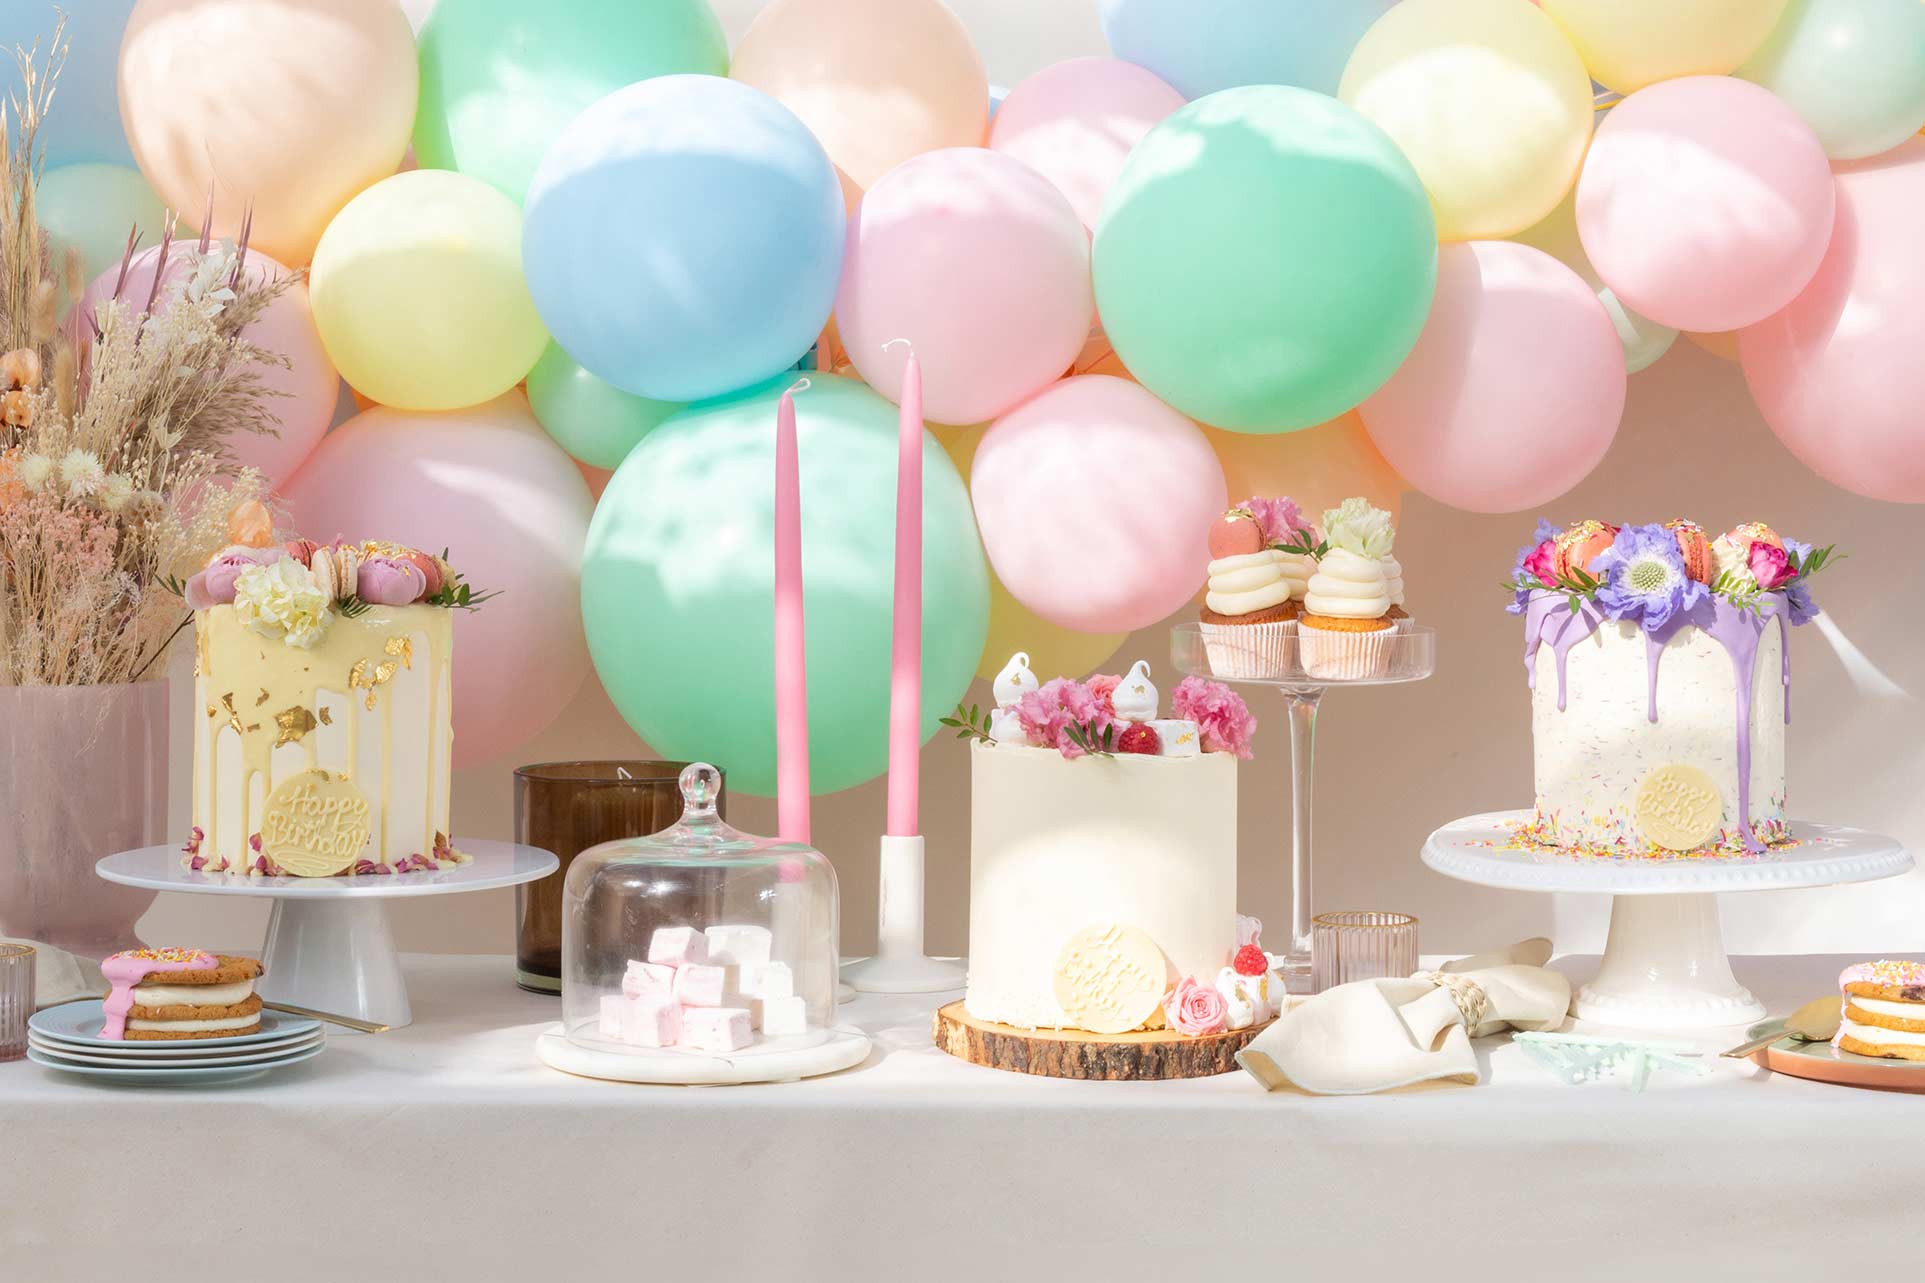 Celebration table with three cakes, lots of sweet treats such as cup cakes surrounded by balloons